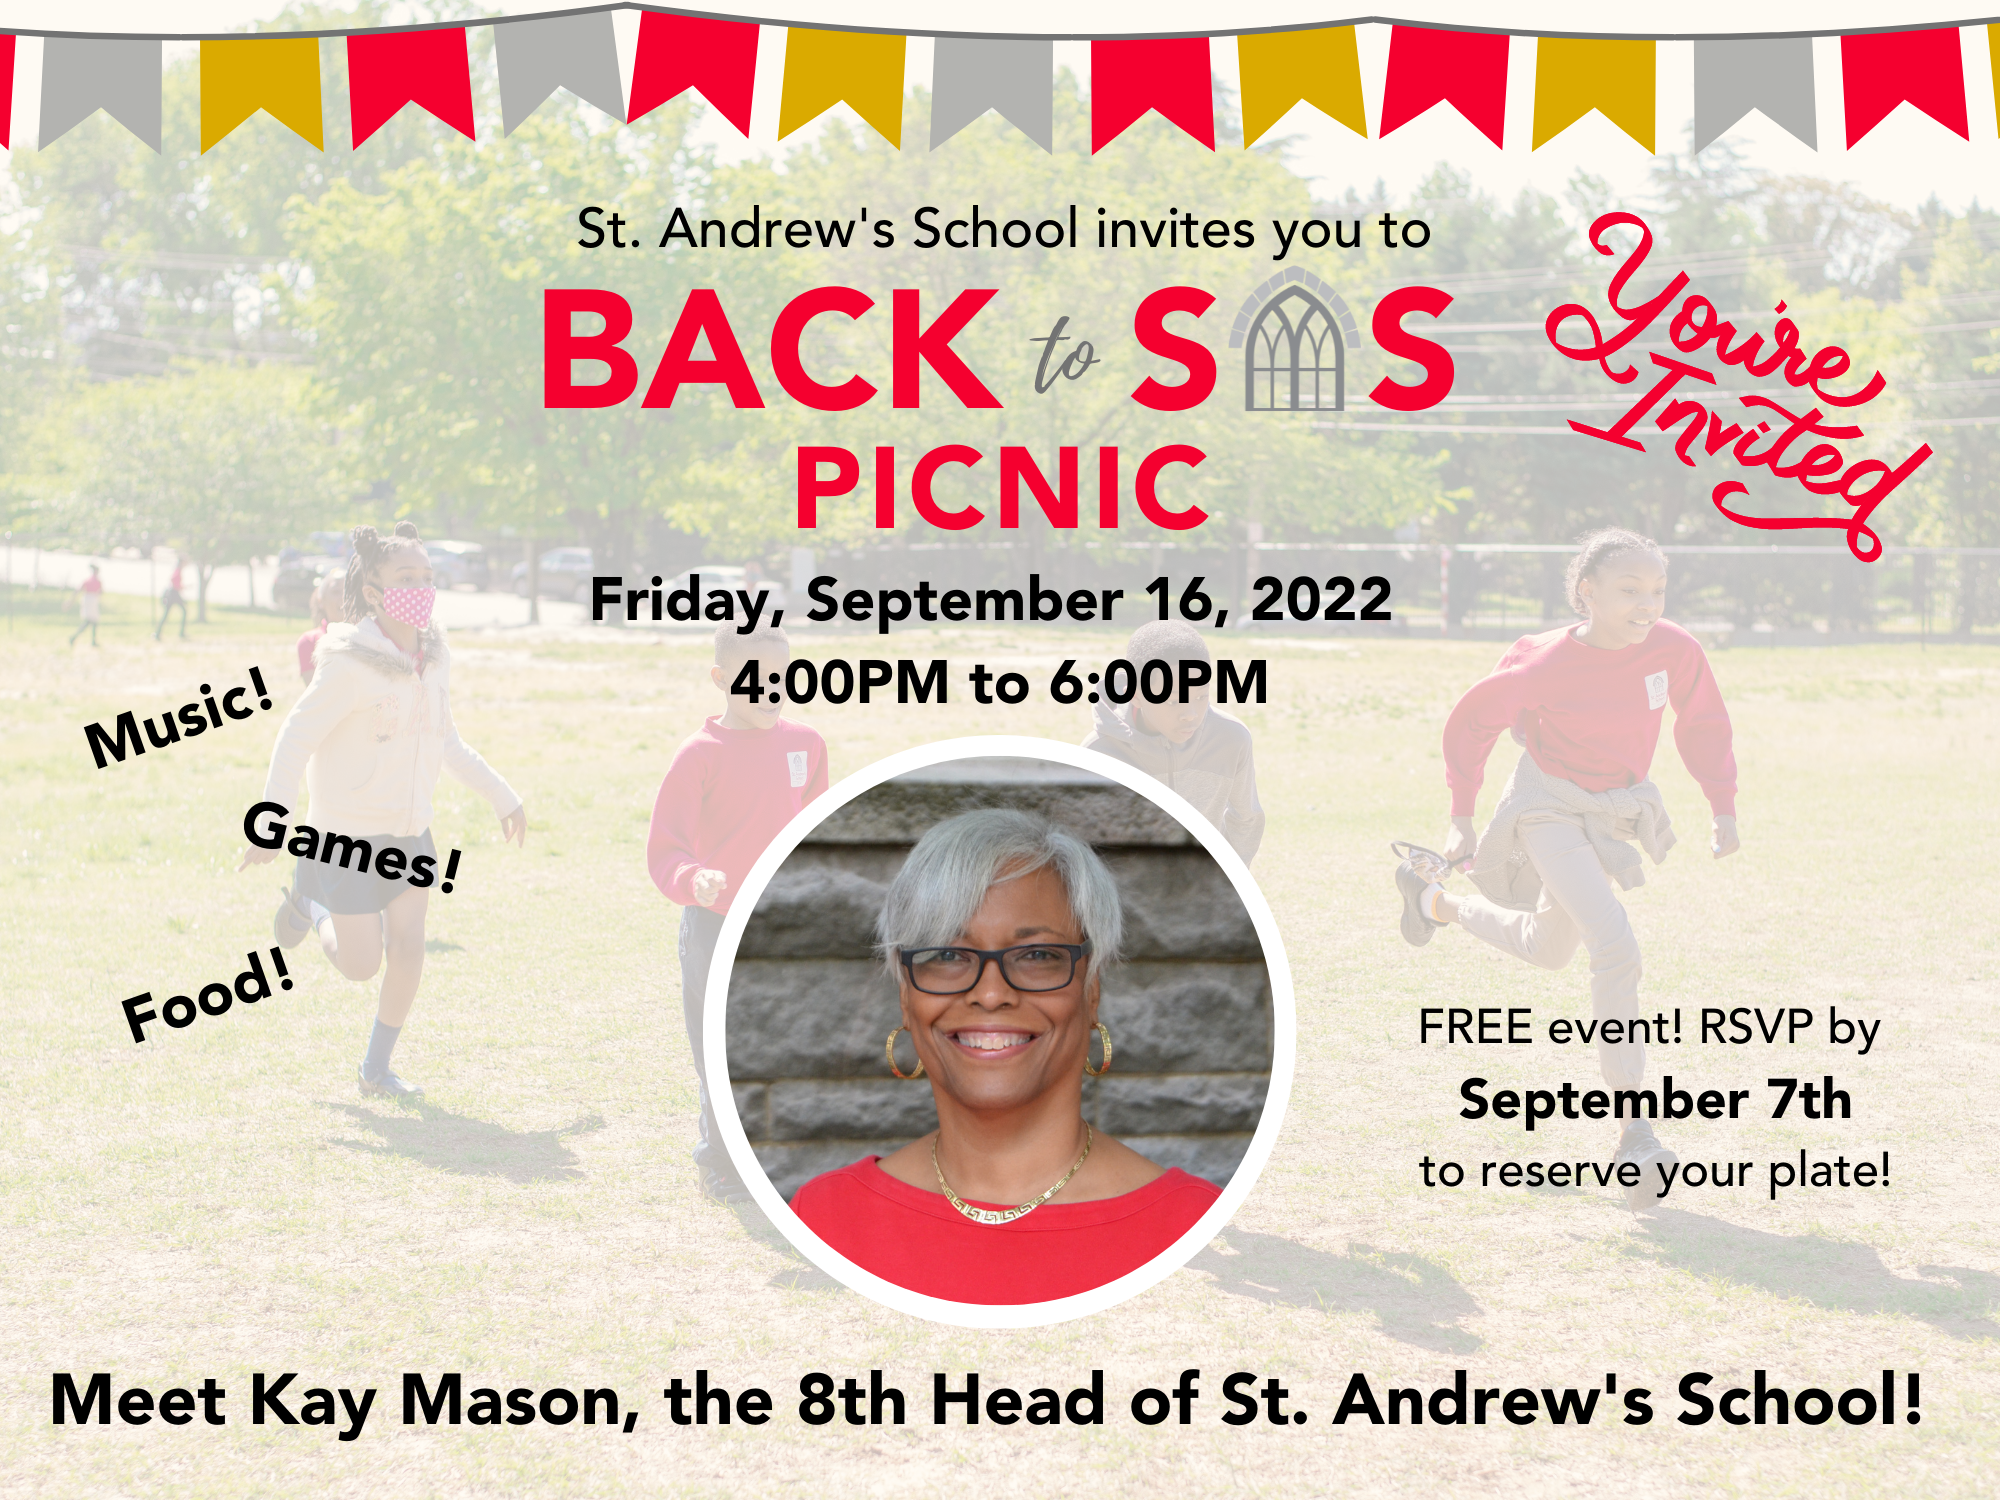 A graphic for our Back to School Picnic, taking place on Friday, September 16th from 4 to 6PM.